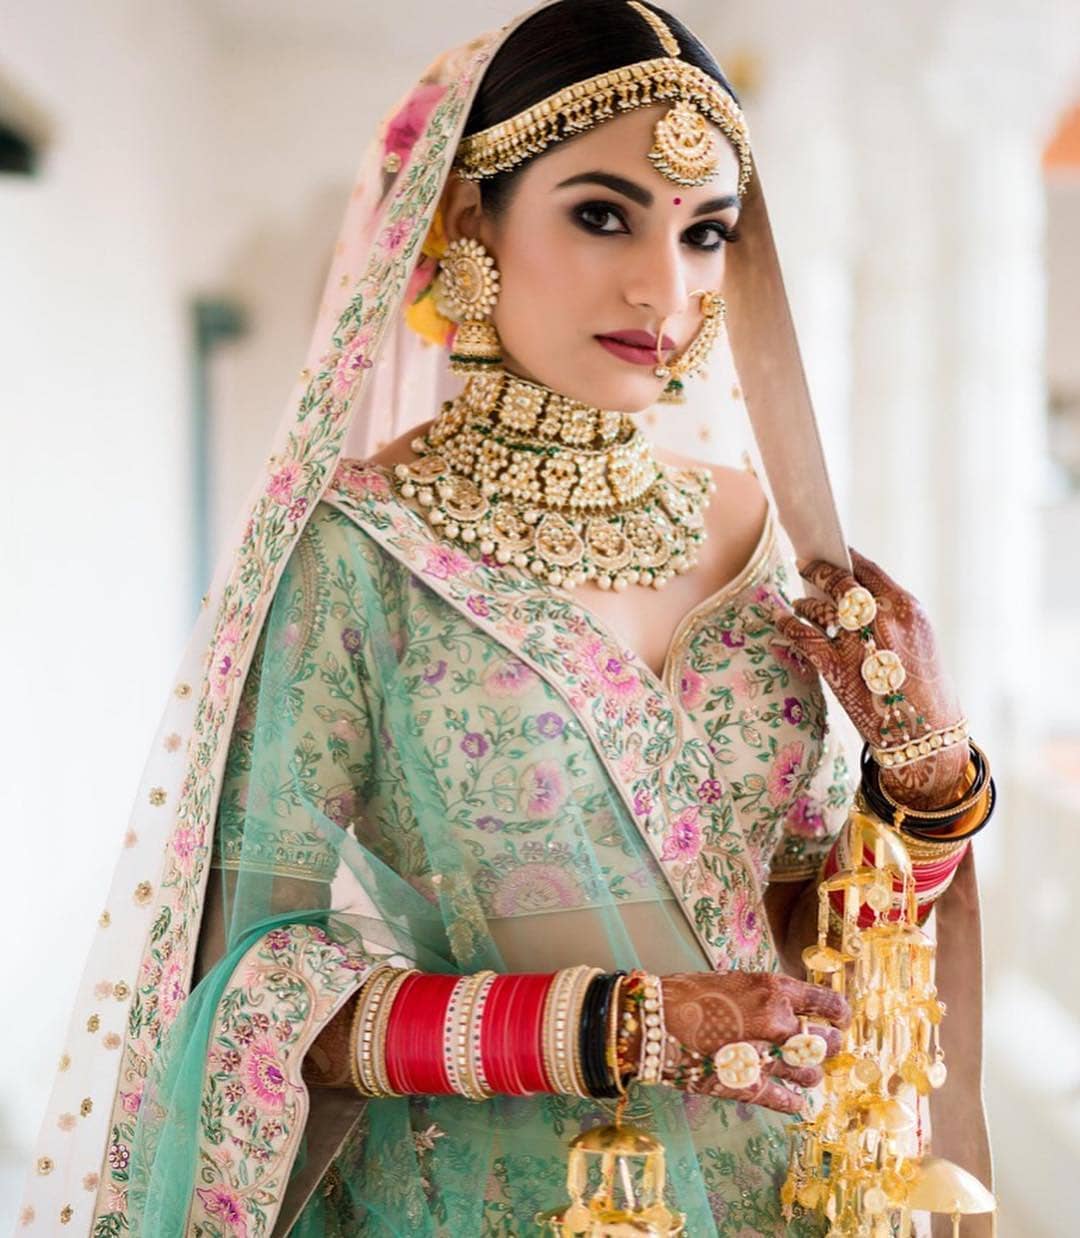  Looking so subtle: Real Bridal Looks, Styles & Dresses Inspirations